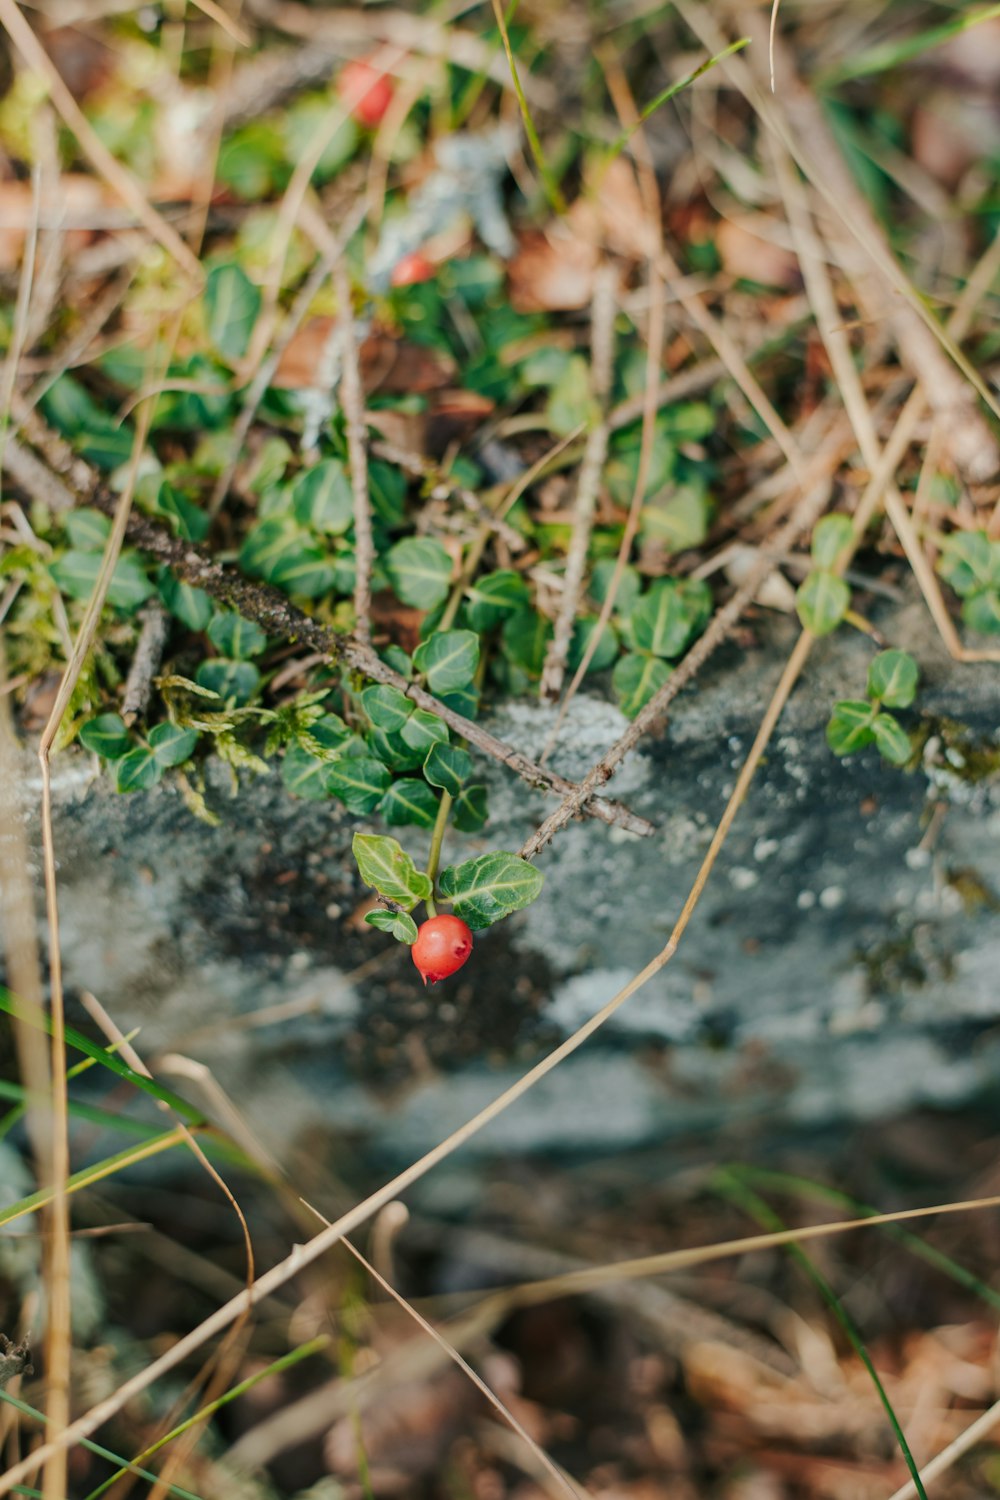 a small red berry growing on a plant in the grass